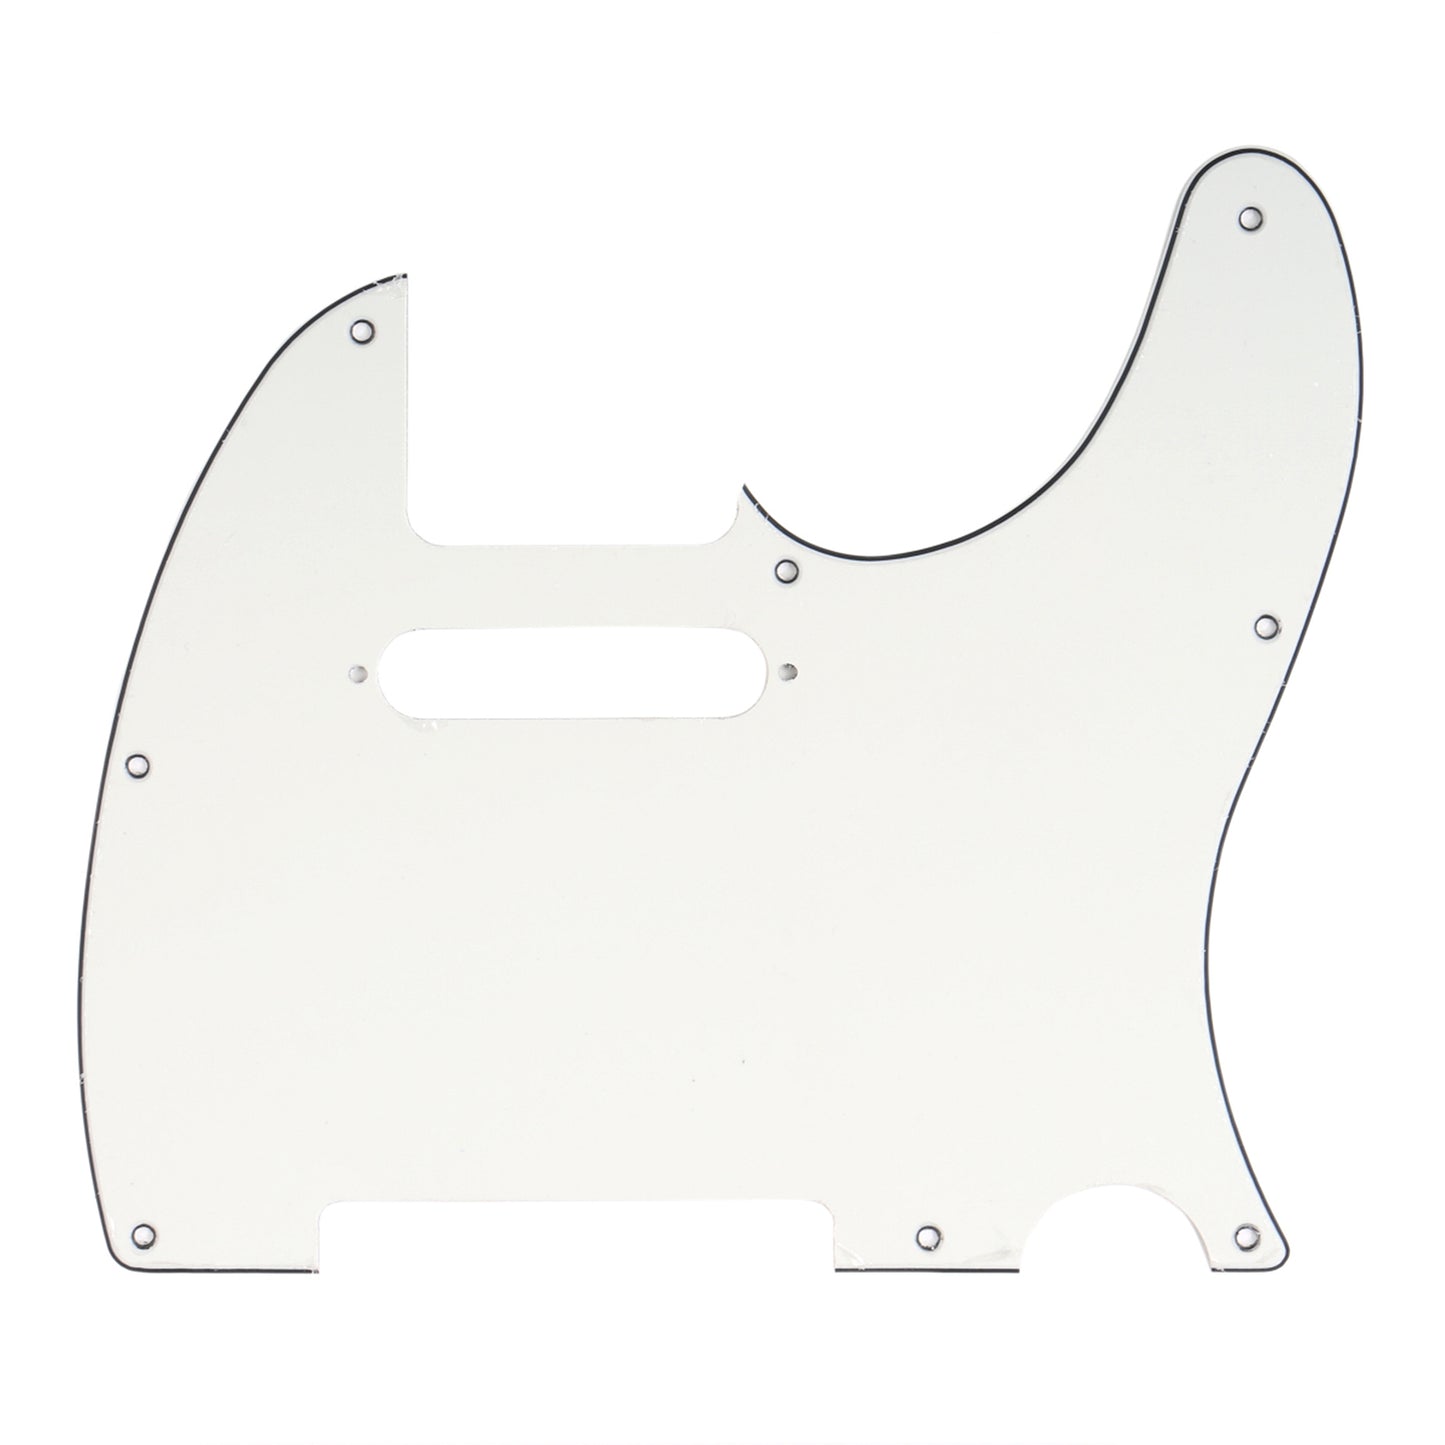 Musiclily 8 Hole Tele Guitar Pickguard for USA/Mexican Made Fender Standard Telecaster Modern Style, 3Ply Parchment